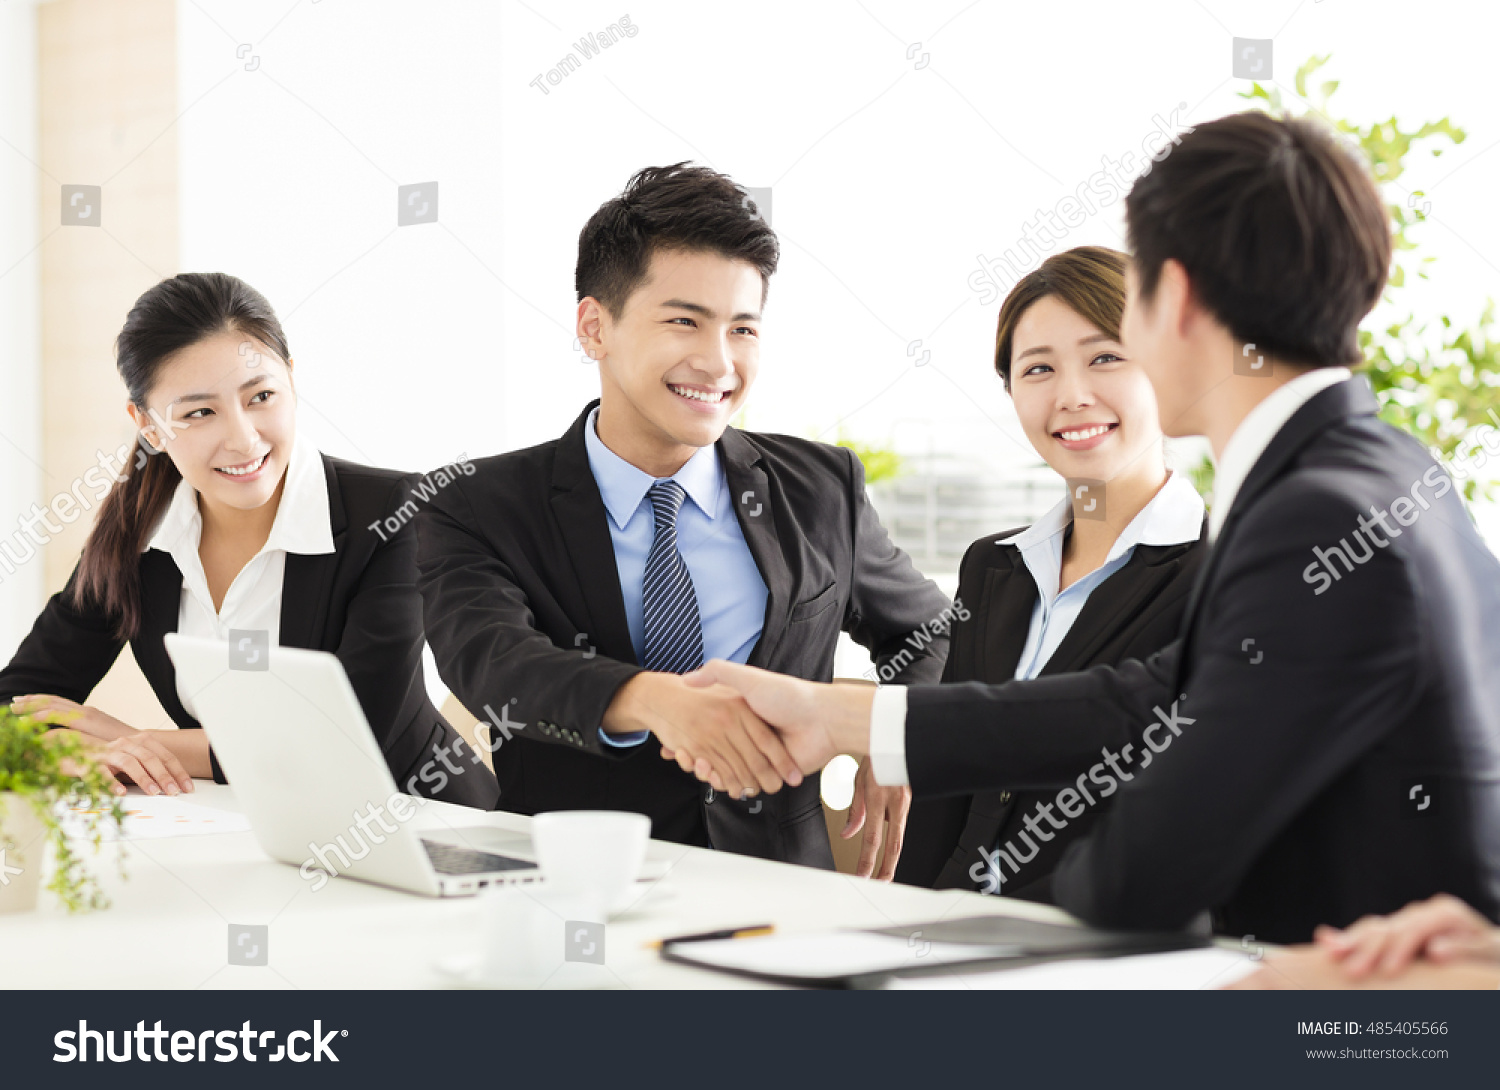 business people shaking hands during meeting #485405566